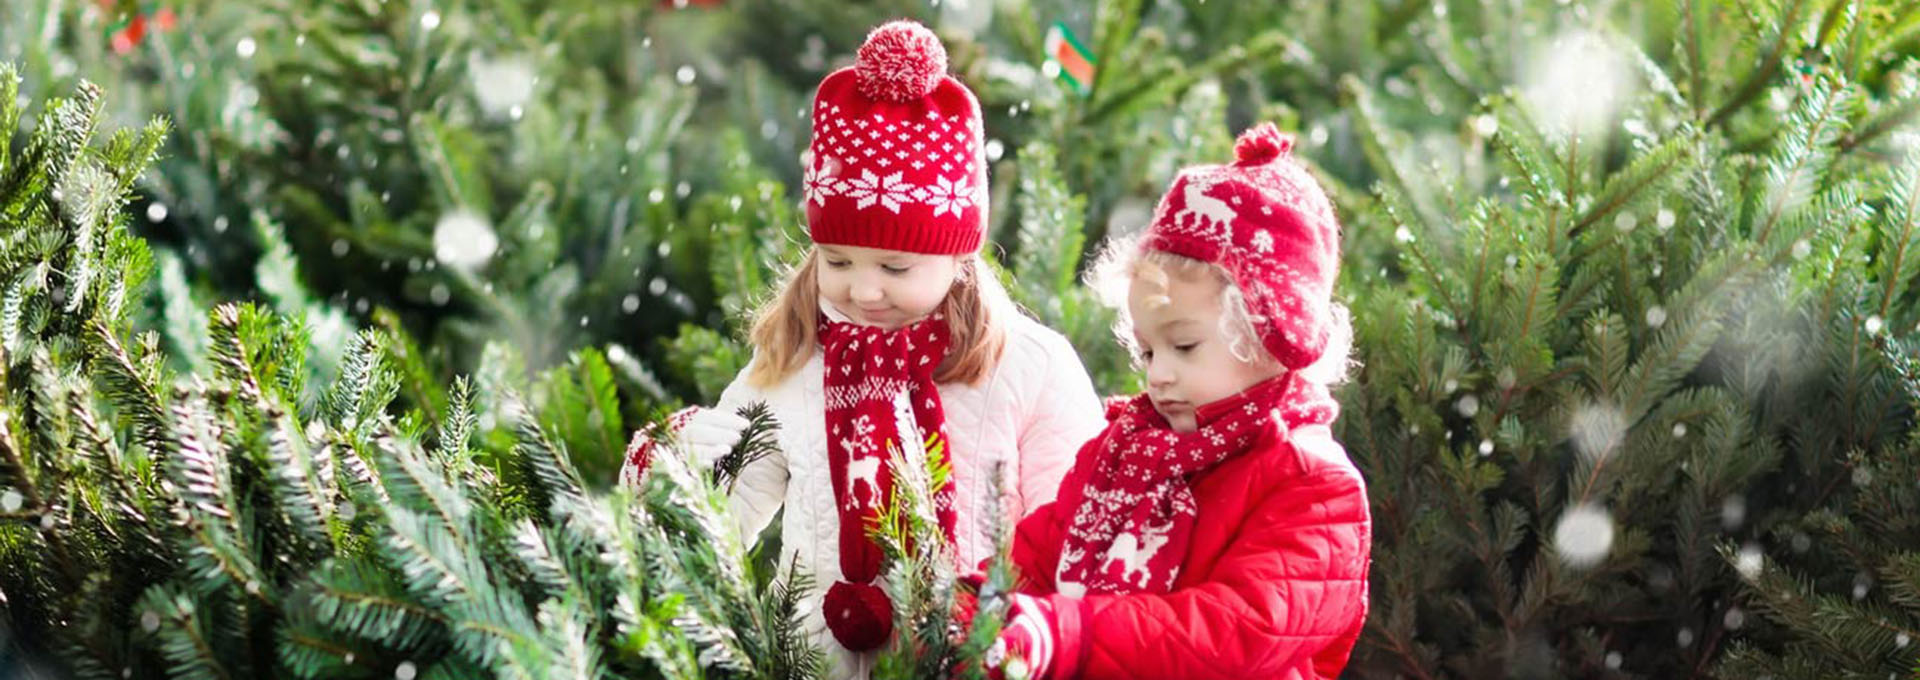 English-Gardens-Fresh-Christmas-Trees-In-Store copy